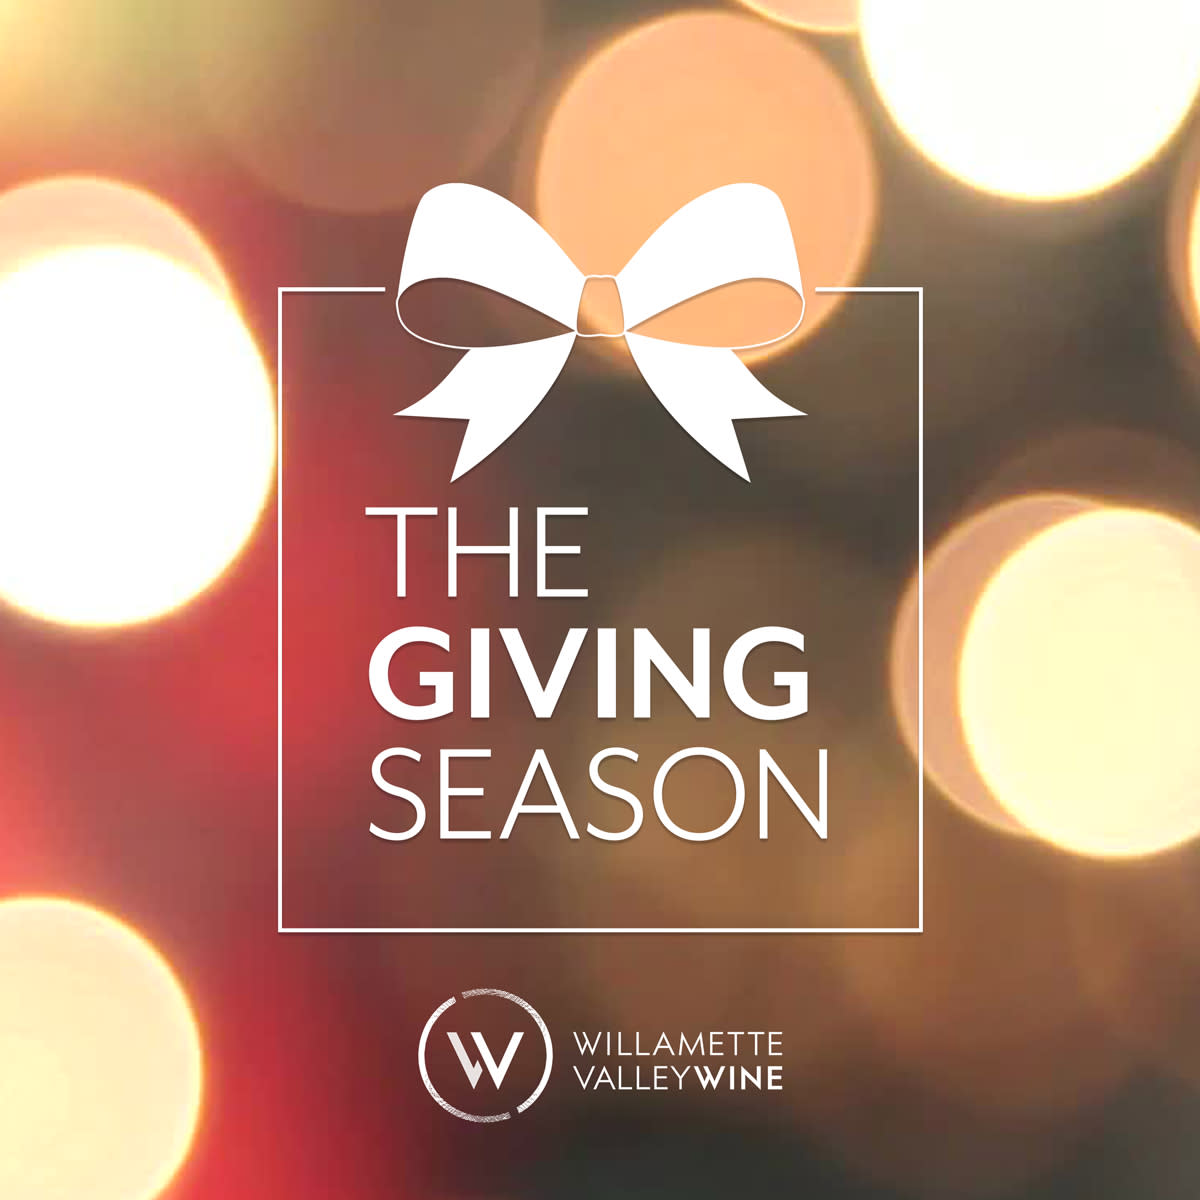 The Giving Season text with festive lights background